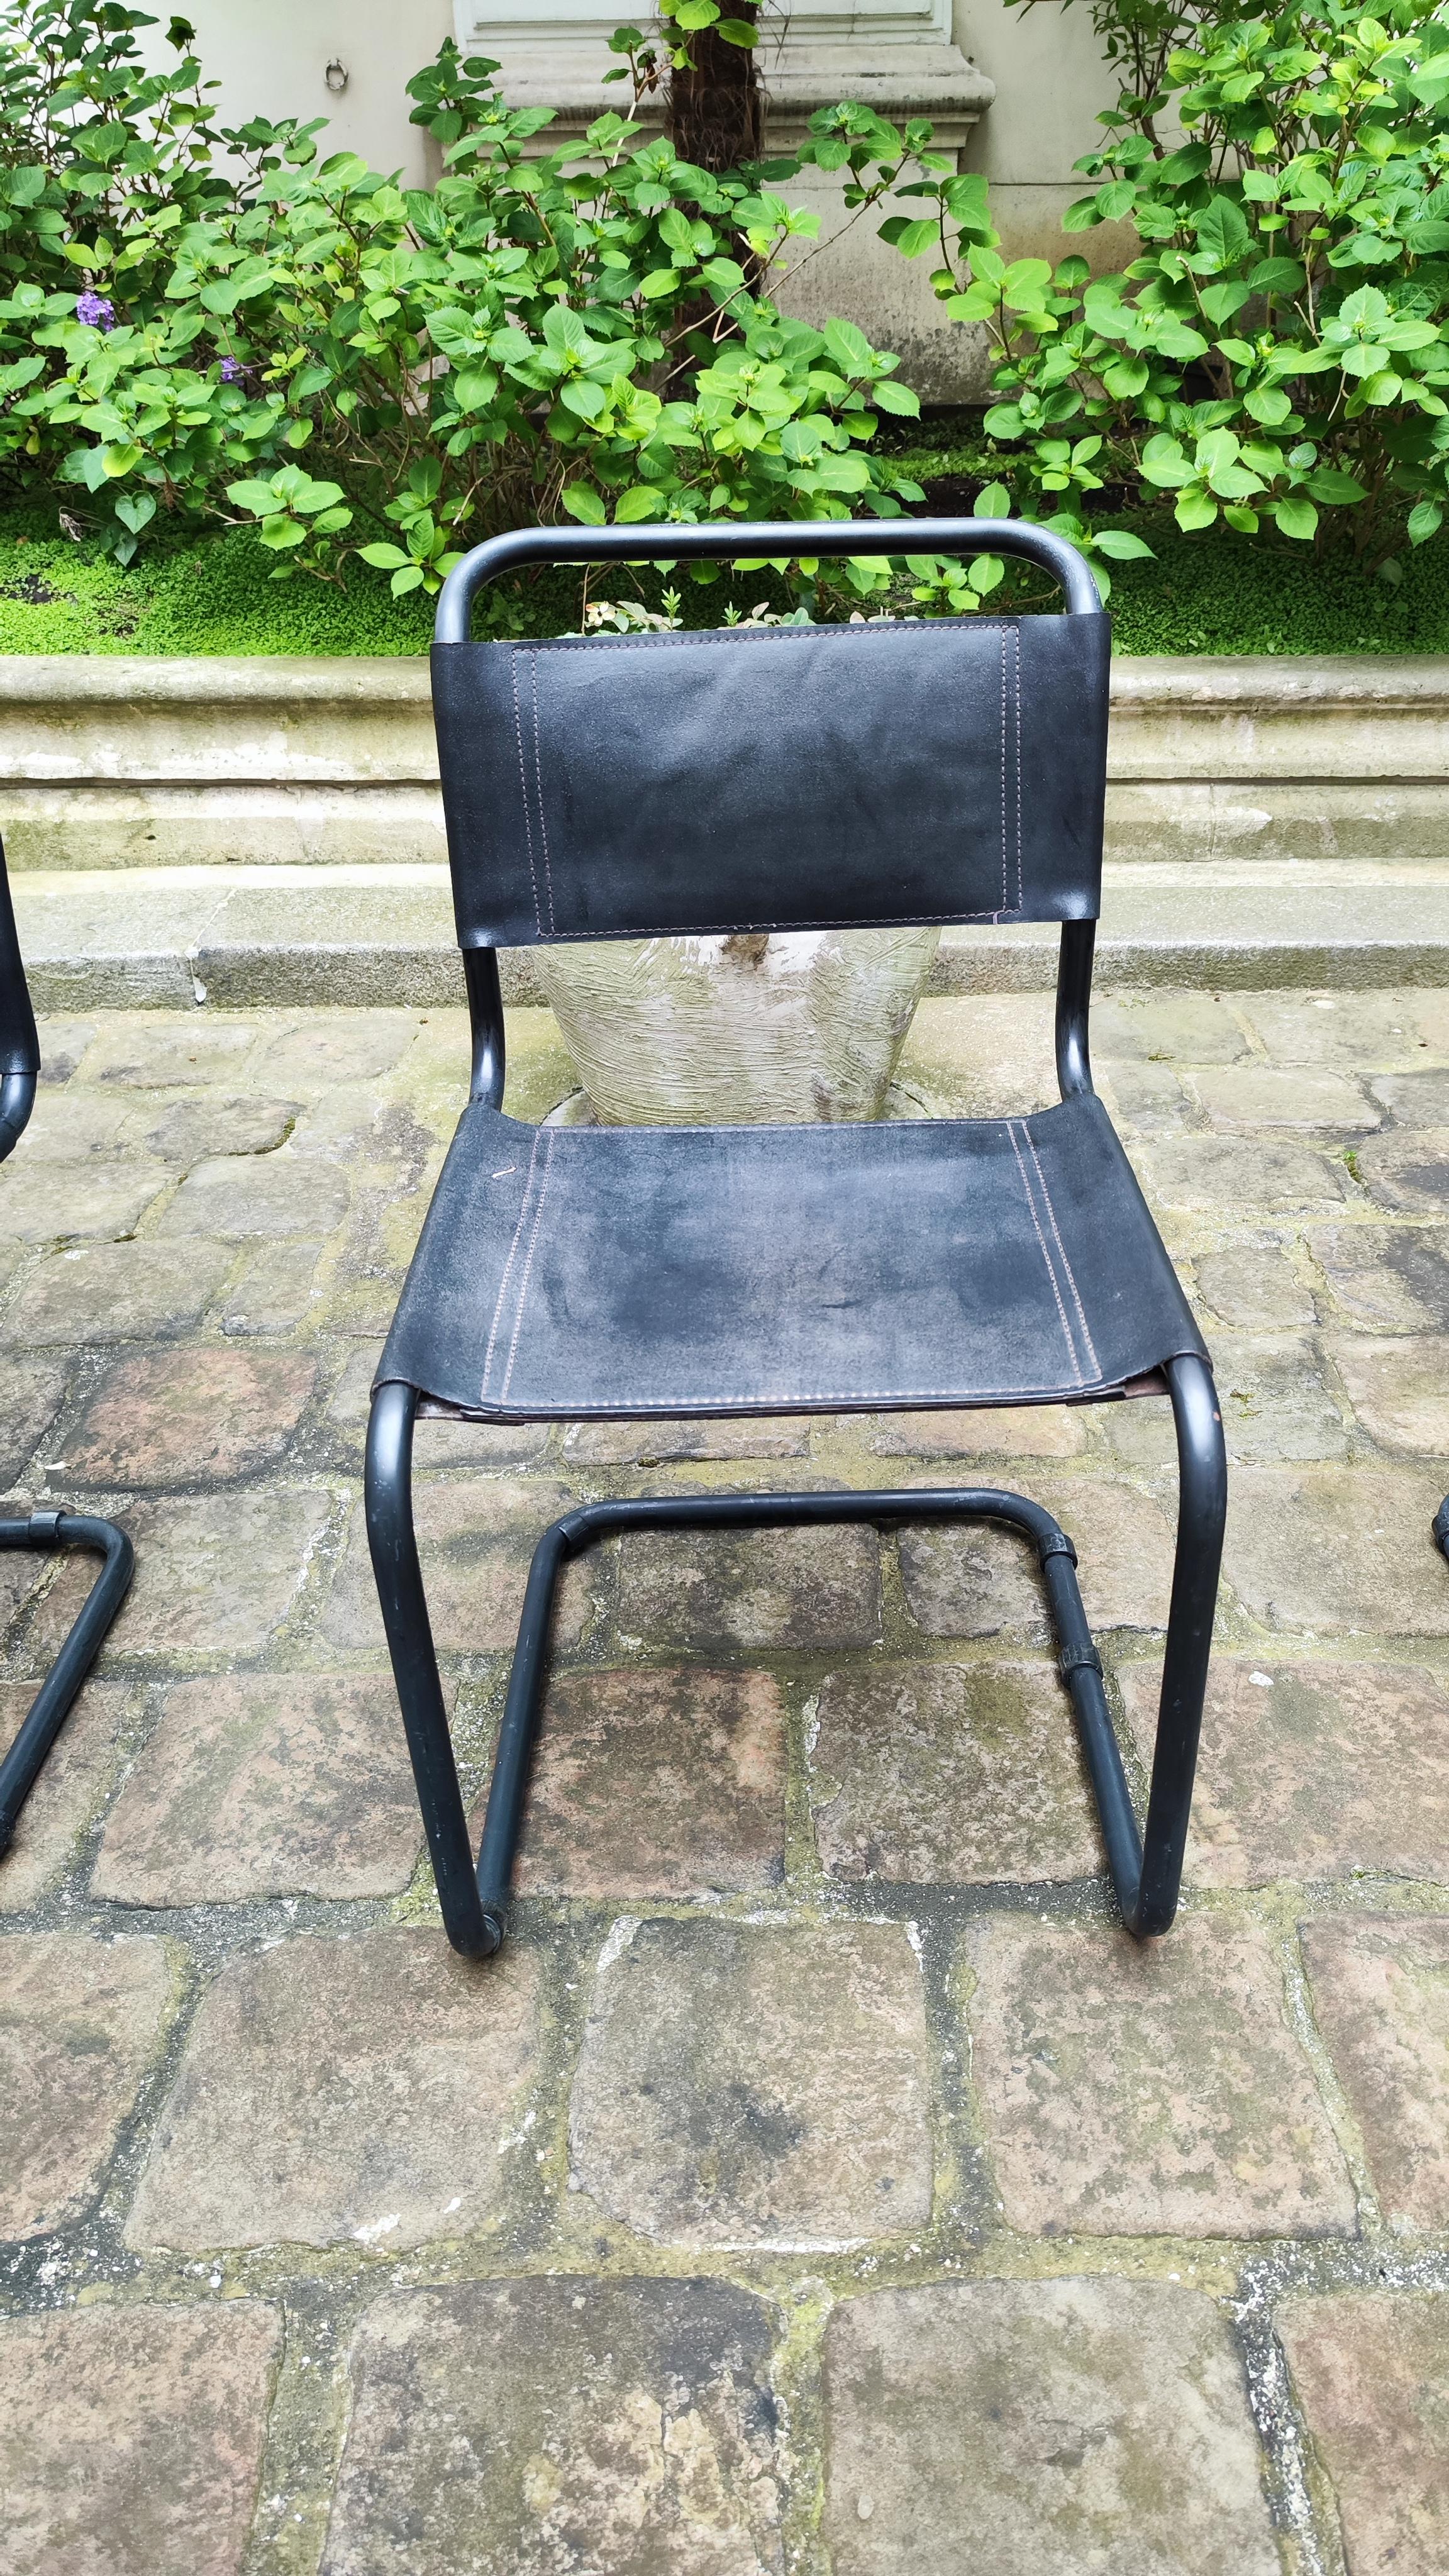 4 B33 MART STAM CANTILEVER CHAIRS AND 1 S34 ARMCHAIR - 80s  - 1980 For Sale 6